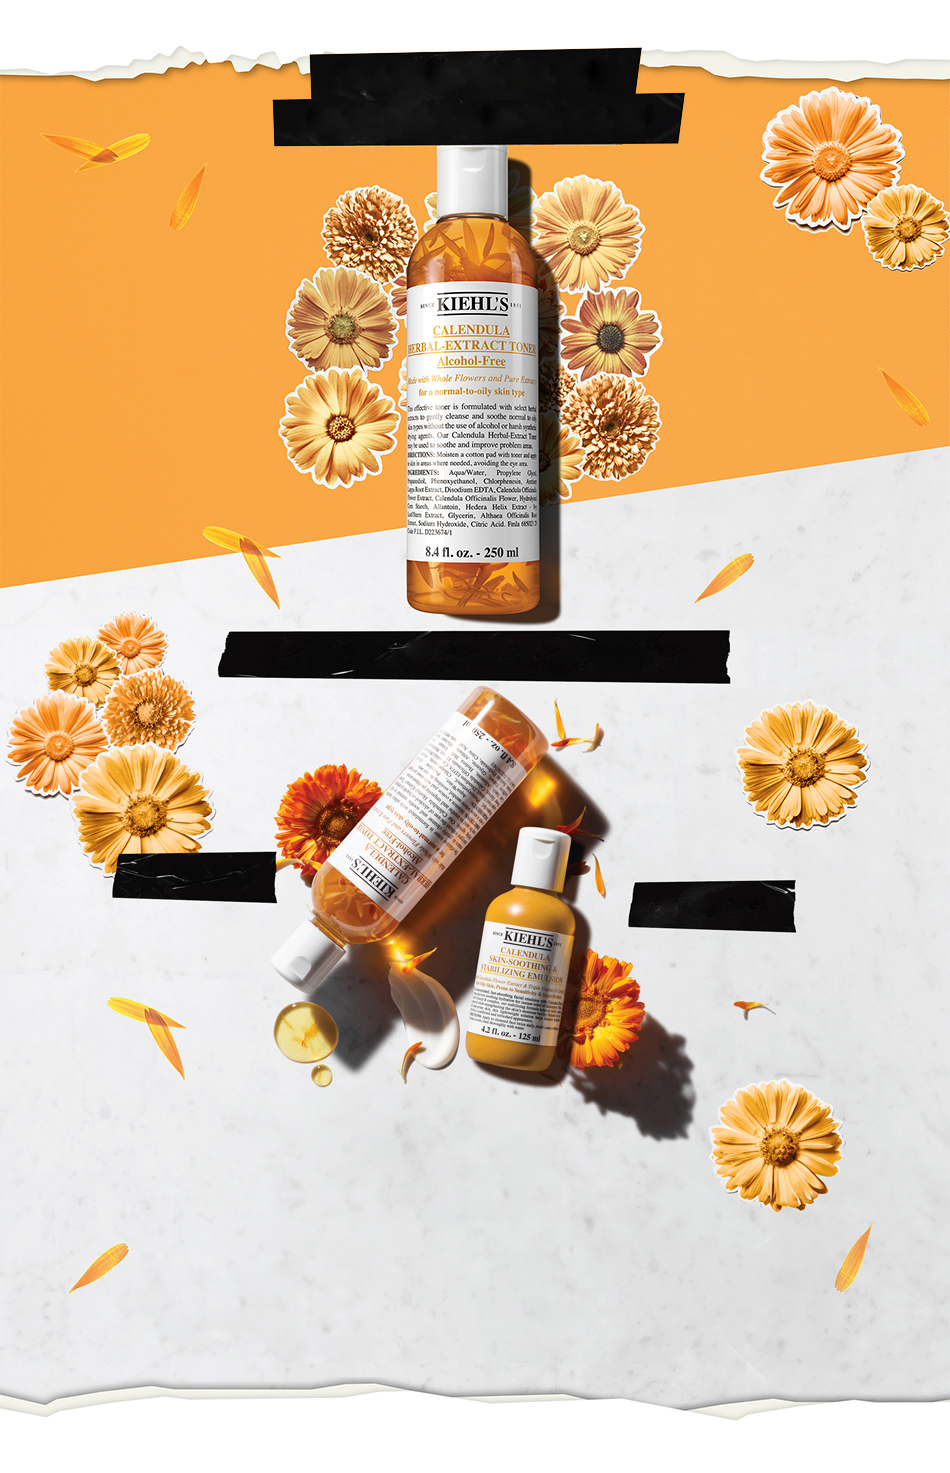 Kiehl’s Calendula Herbal-Extract Alcohol-Free with alcohol-free formula to hydrate and soothe skin